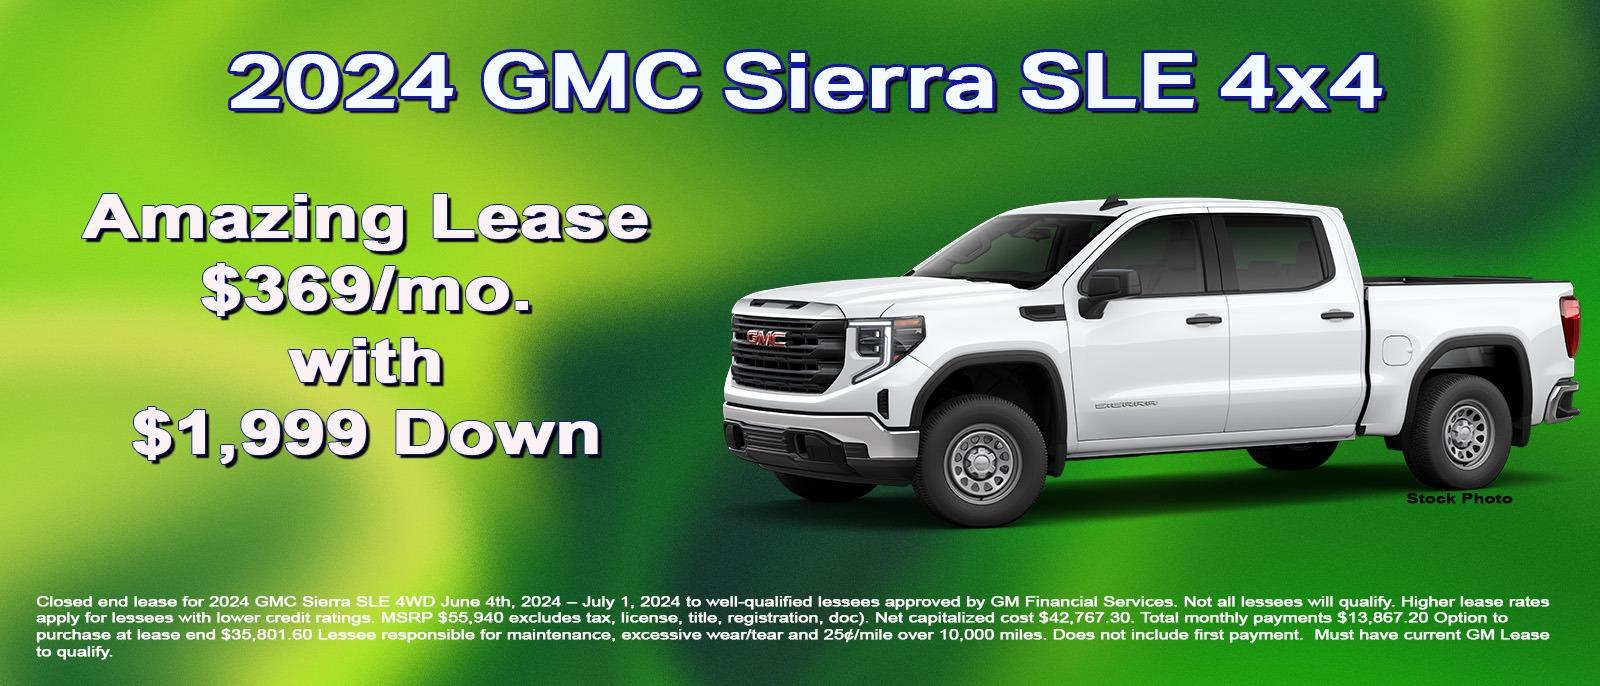 Get your new GMC Sierra for only $369 per month